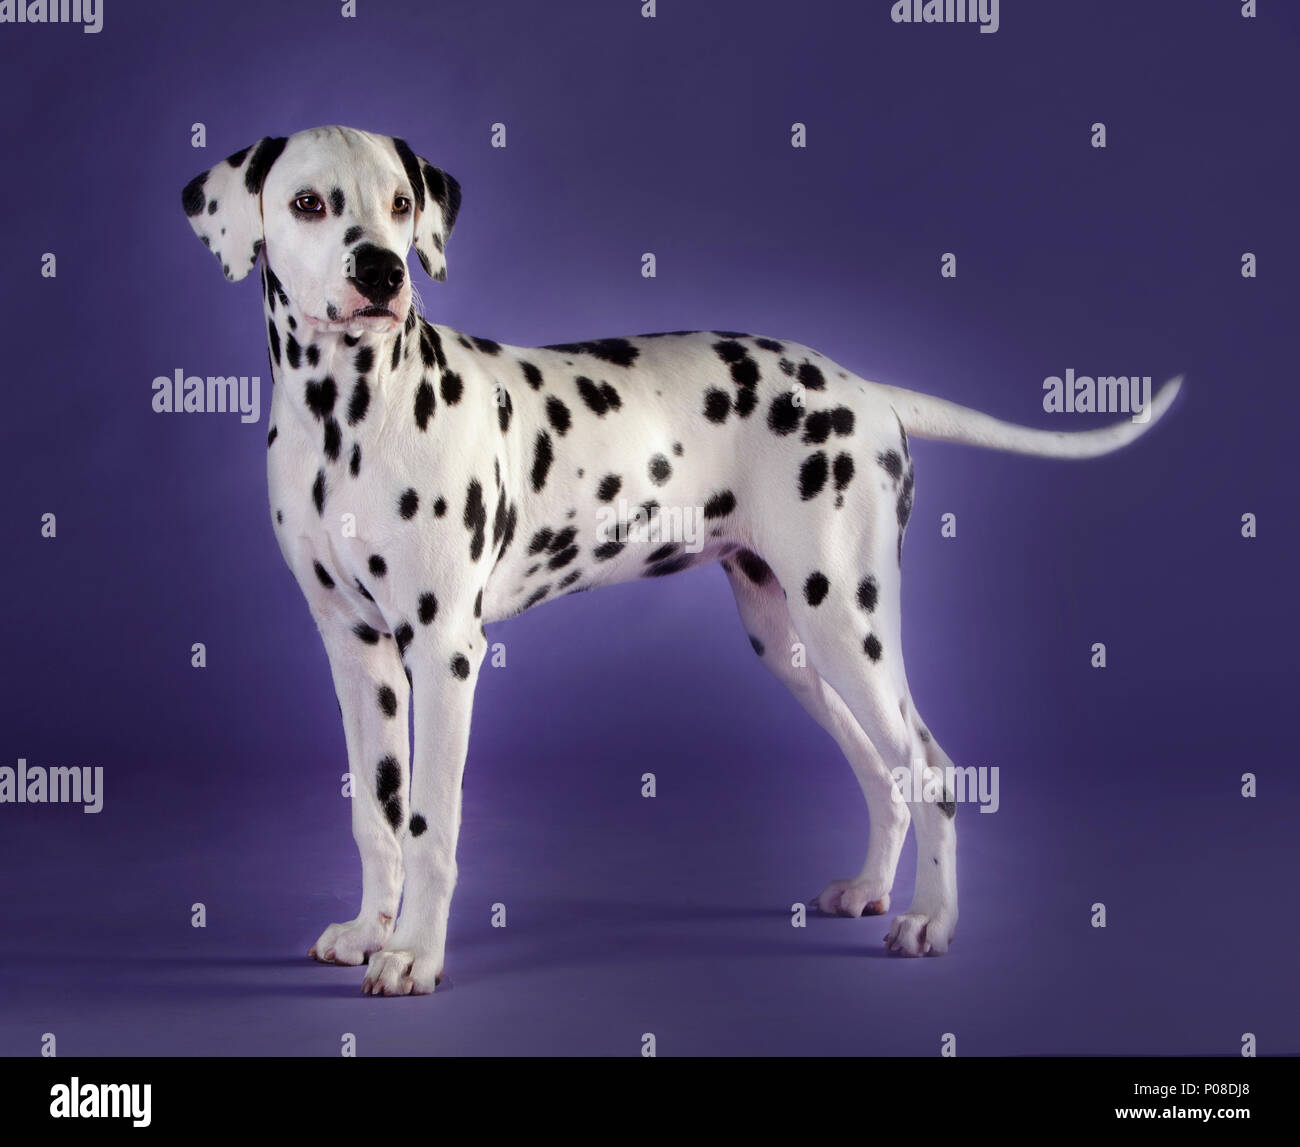 Dalmatian dog in studio with blue background Stock Photo